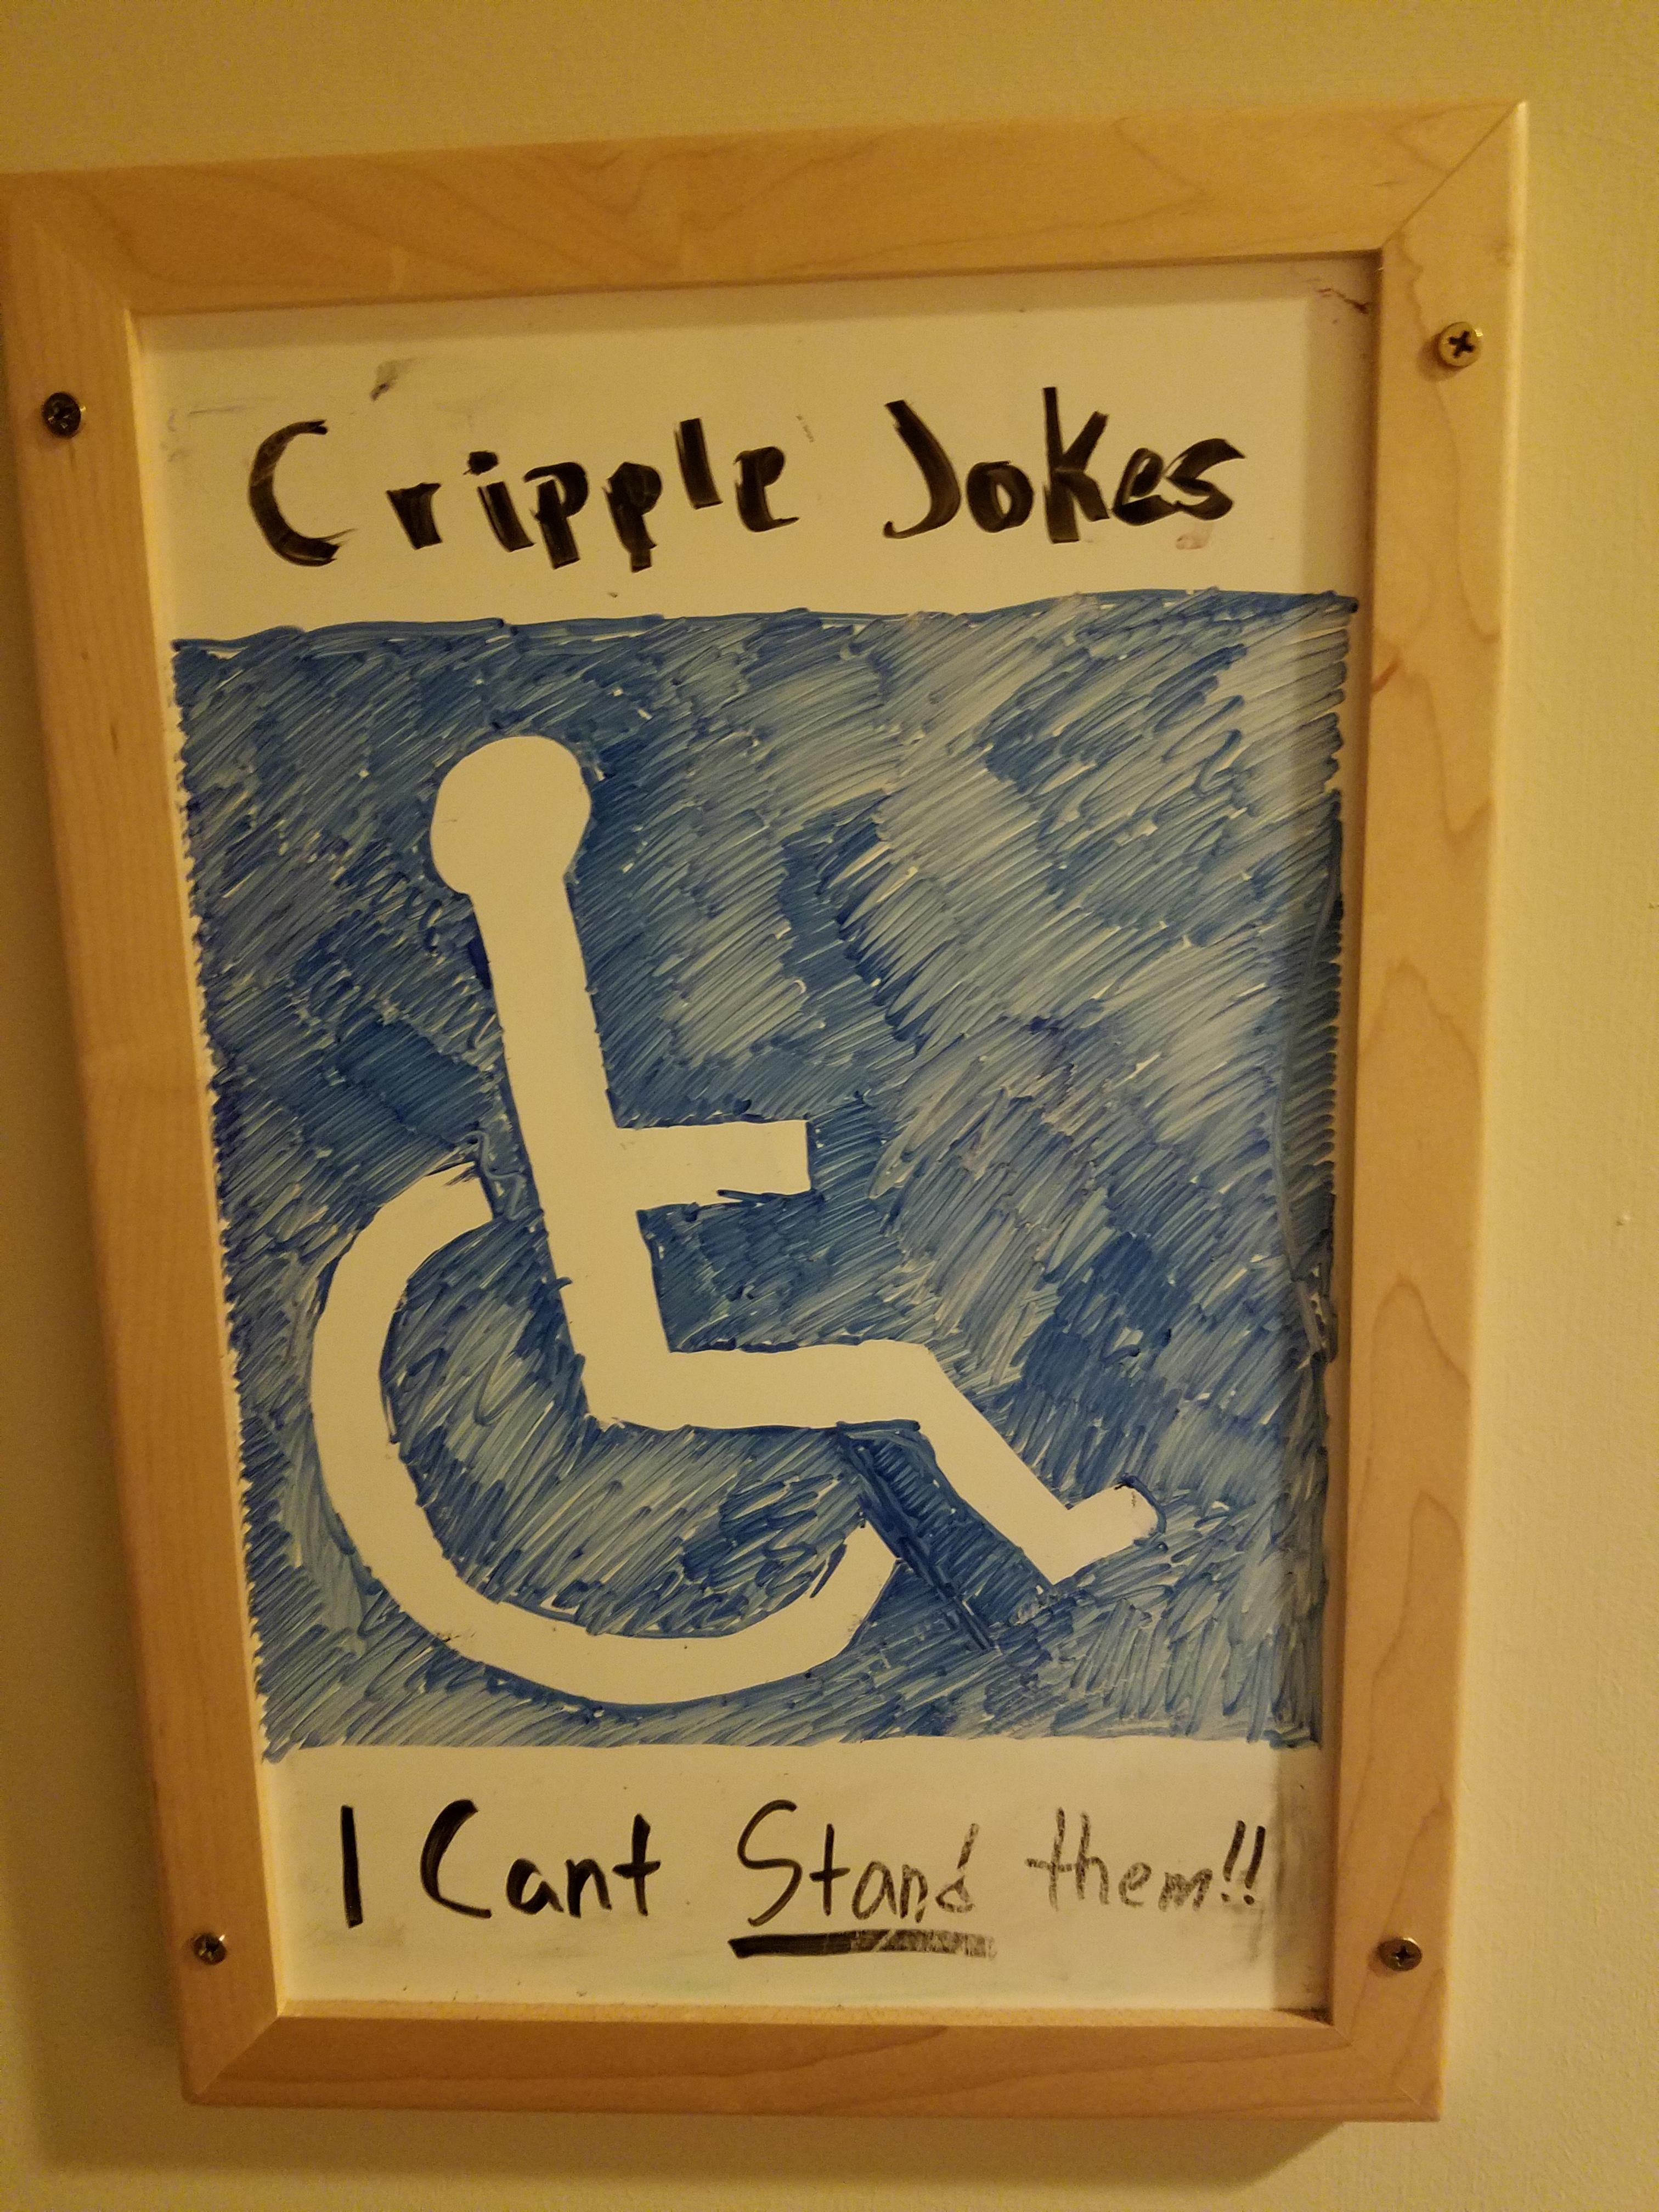 My friend with muscular dystrophy drew this on his whiteboard outside his dorm room.